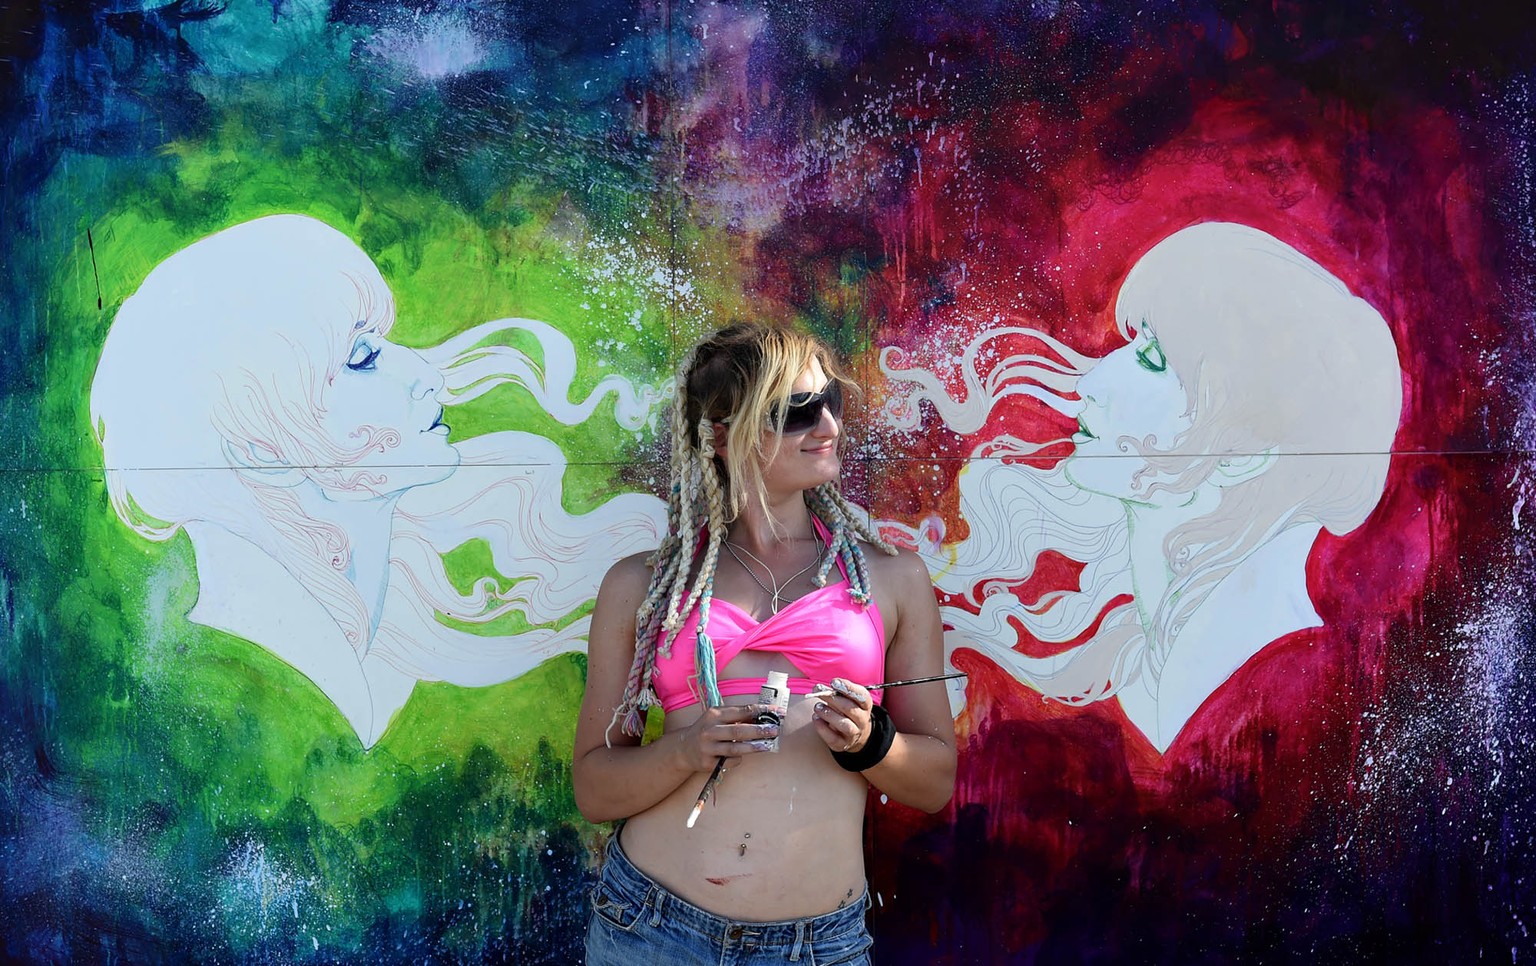 In this Aug. 25, 2014 photo, a woman poses in front of a paining during Burning Man in the Black Rock Desert of Gerlach, Nev. Organizers call Burning Man the largest outdoor arts festival in North Ame ...